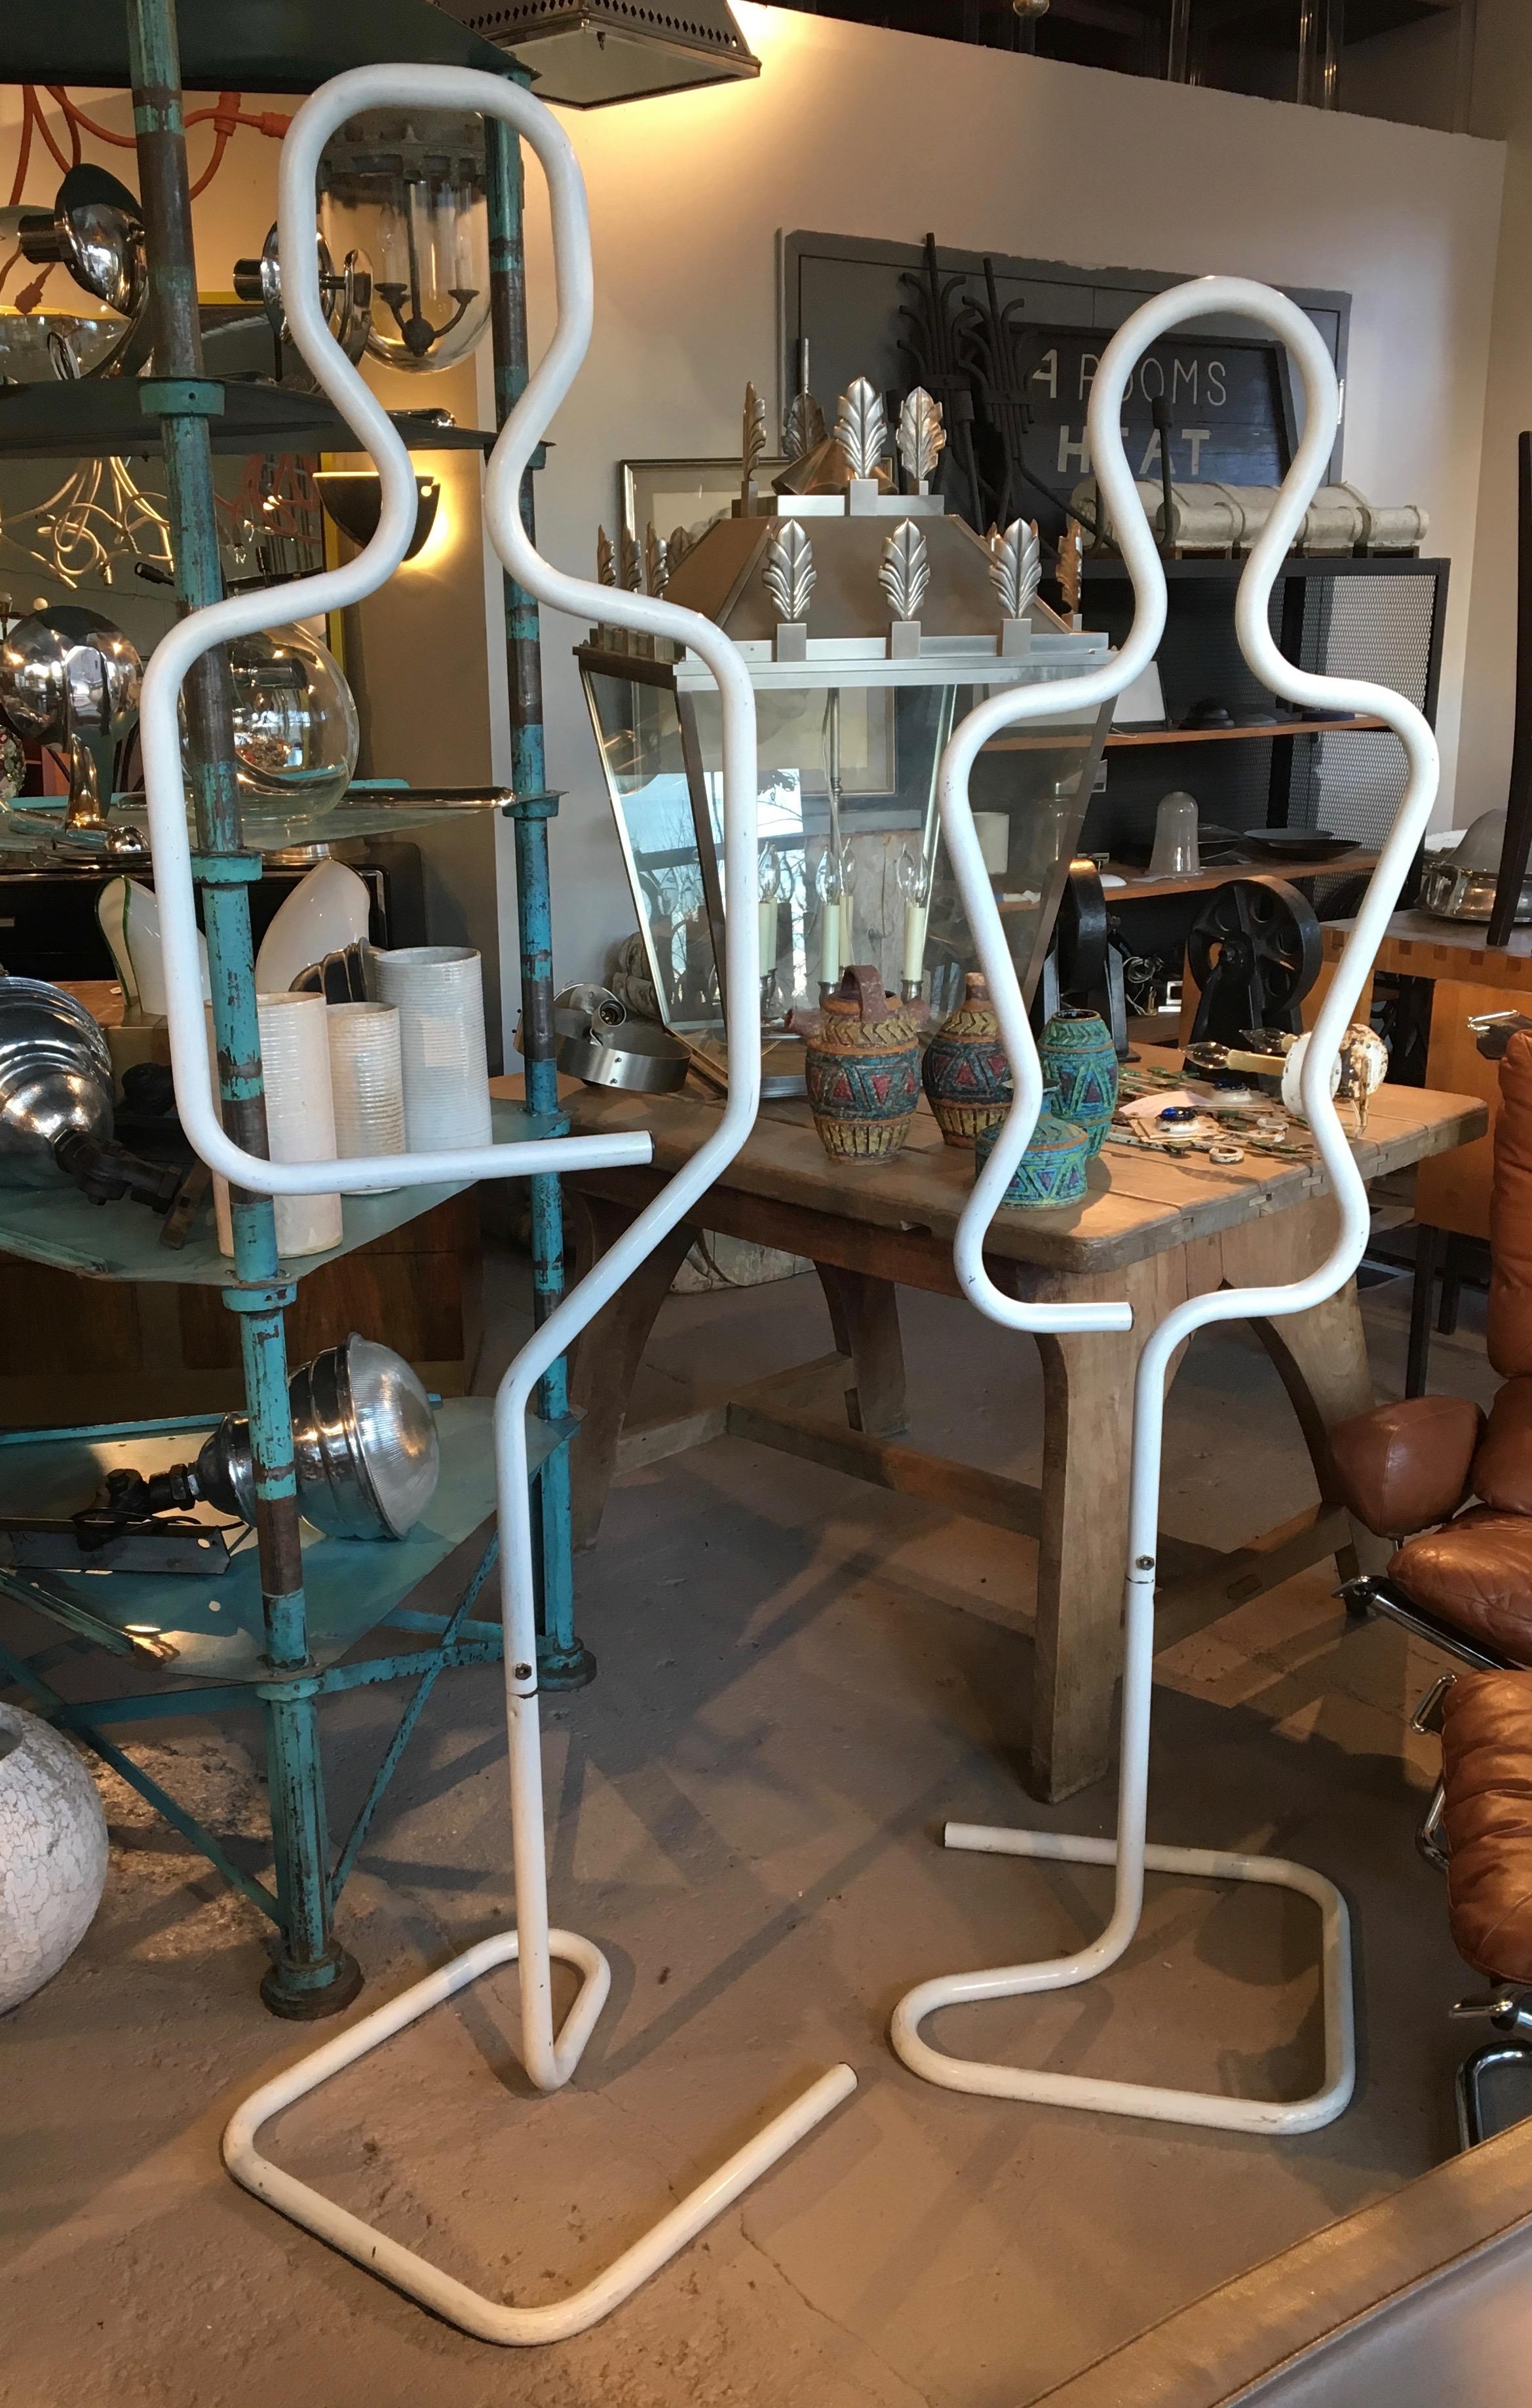 Happy Couple! Enameled white tubular metal forms of a man and woman, each in two parts, life-size shop fittings.
Avantgarden cultivates unexpected and exceptional lighting, furniture and design. Please visit us at our showroom in Pound Ridge, New